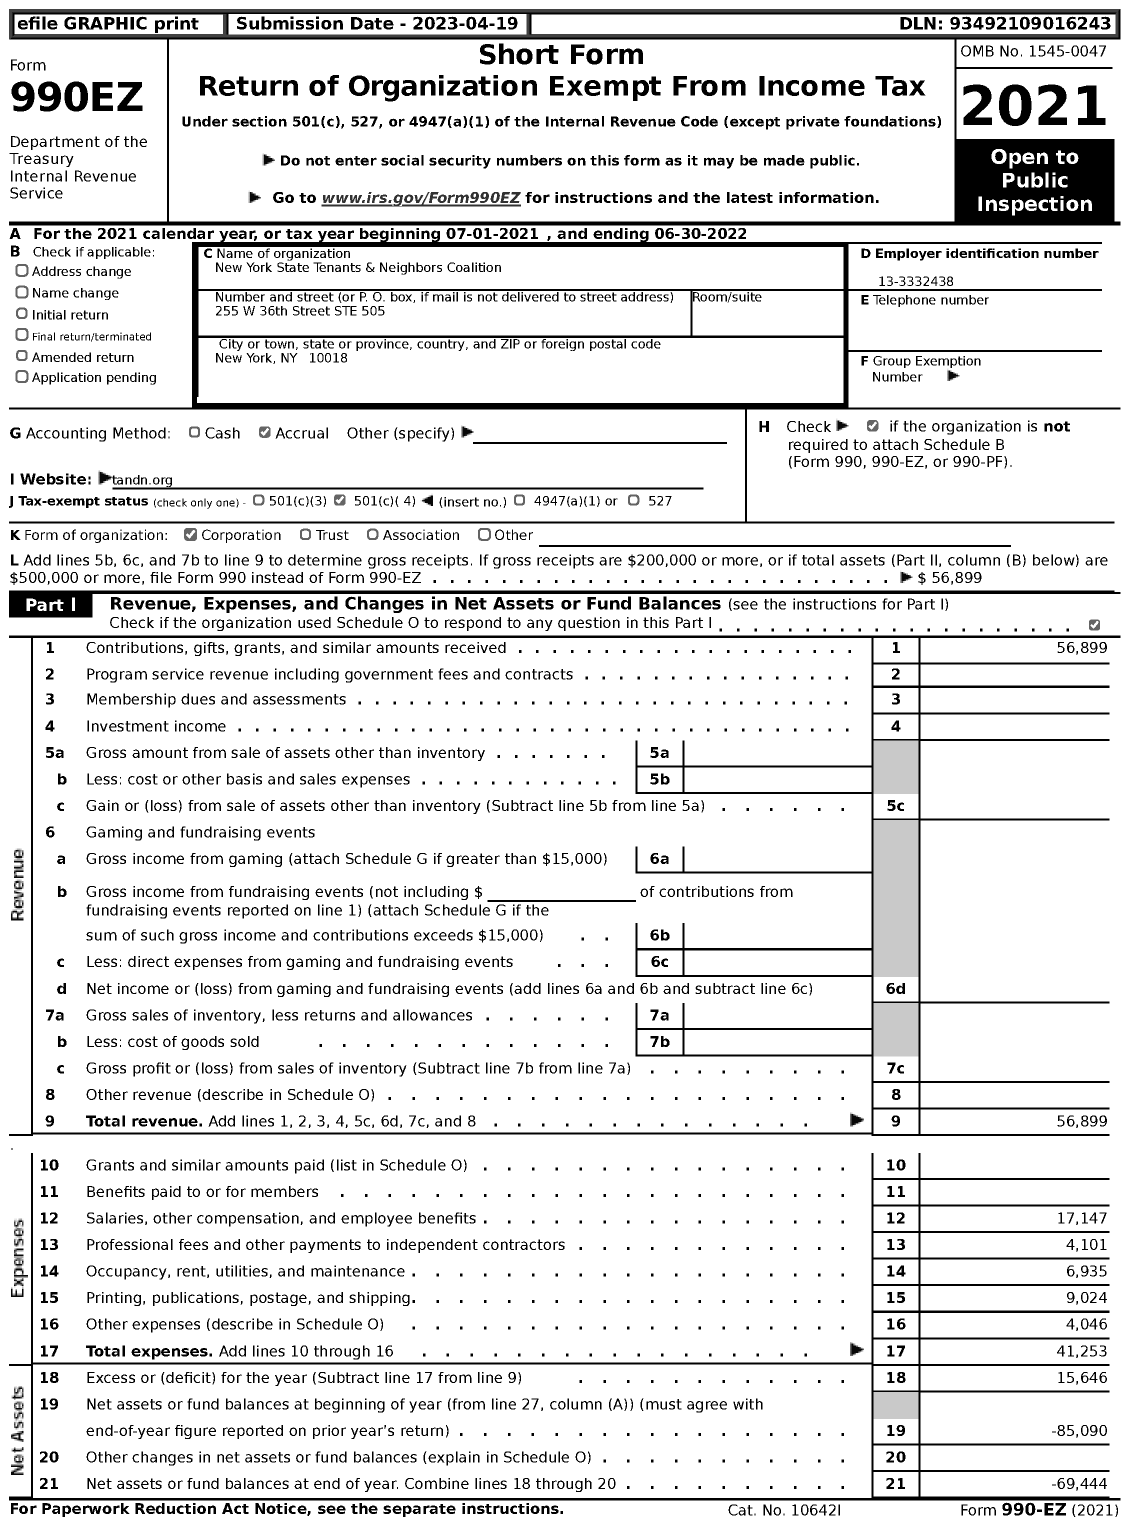 Image of first page of 2021 Form 990EZ for New York State Tenants & Neighbors Coalition